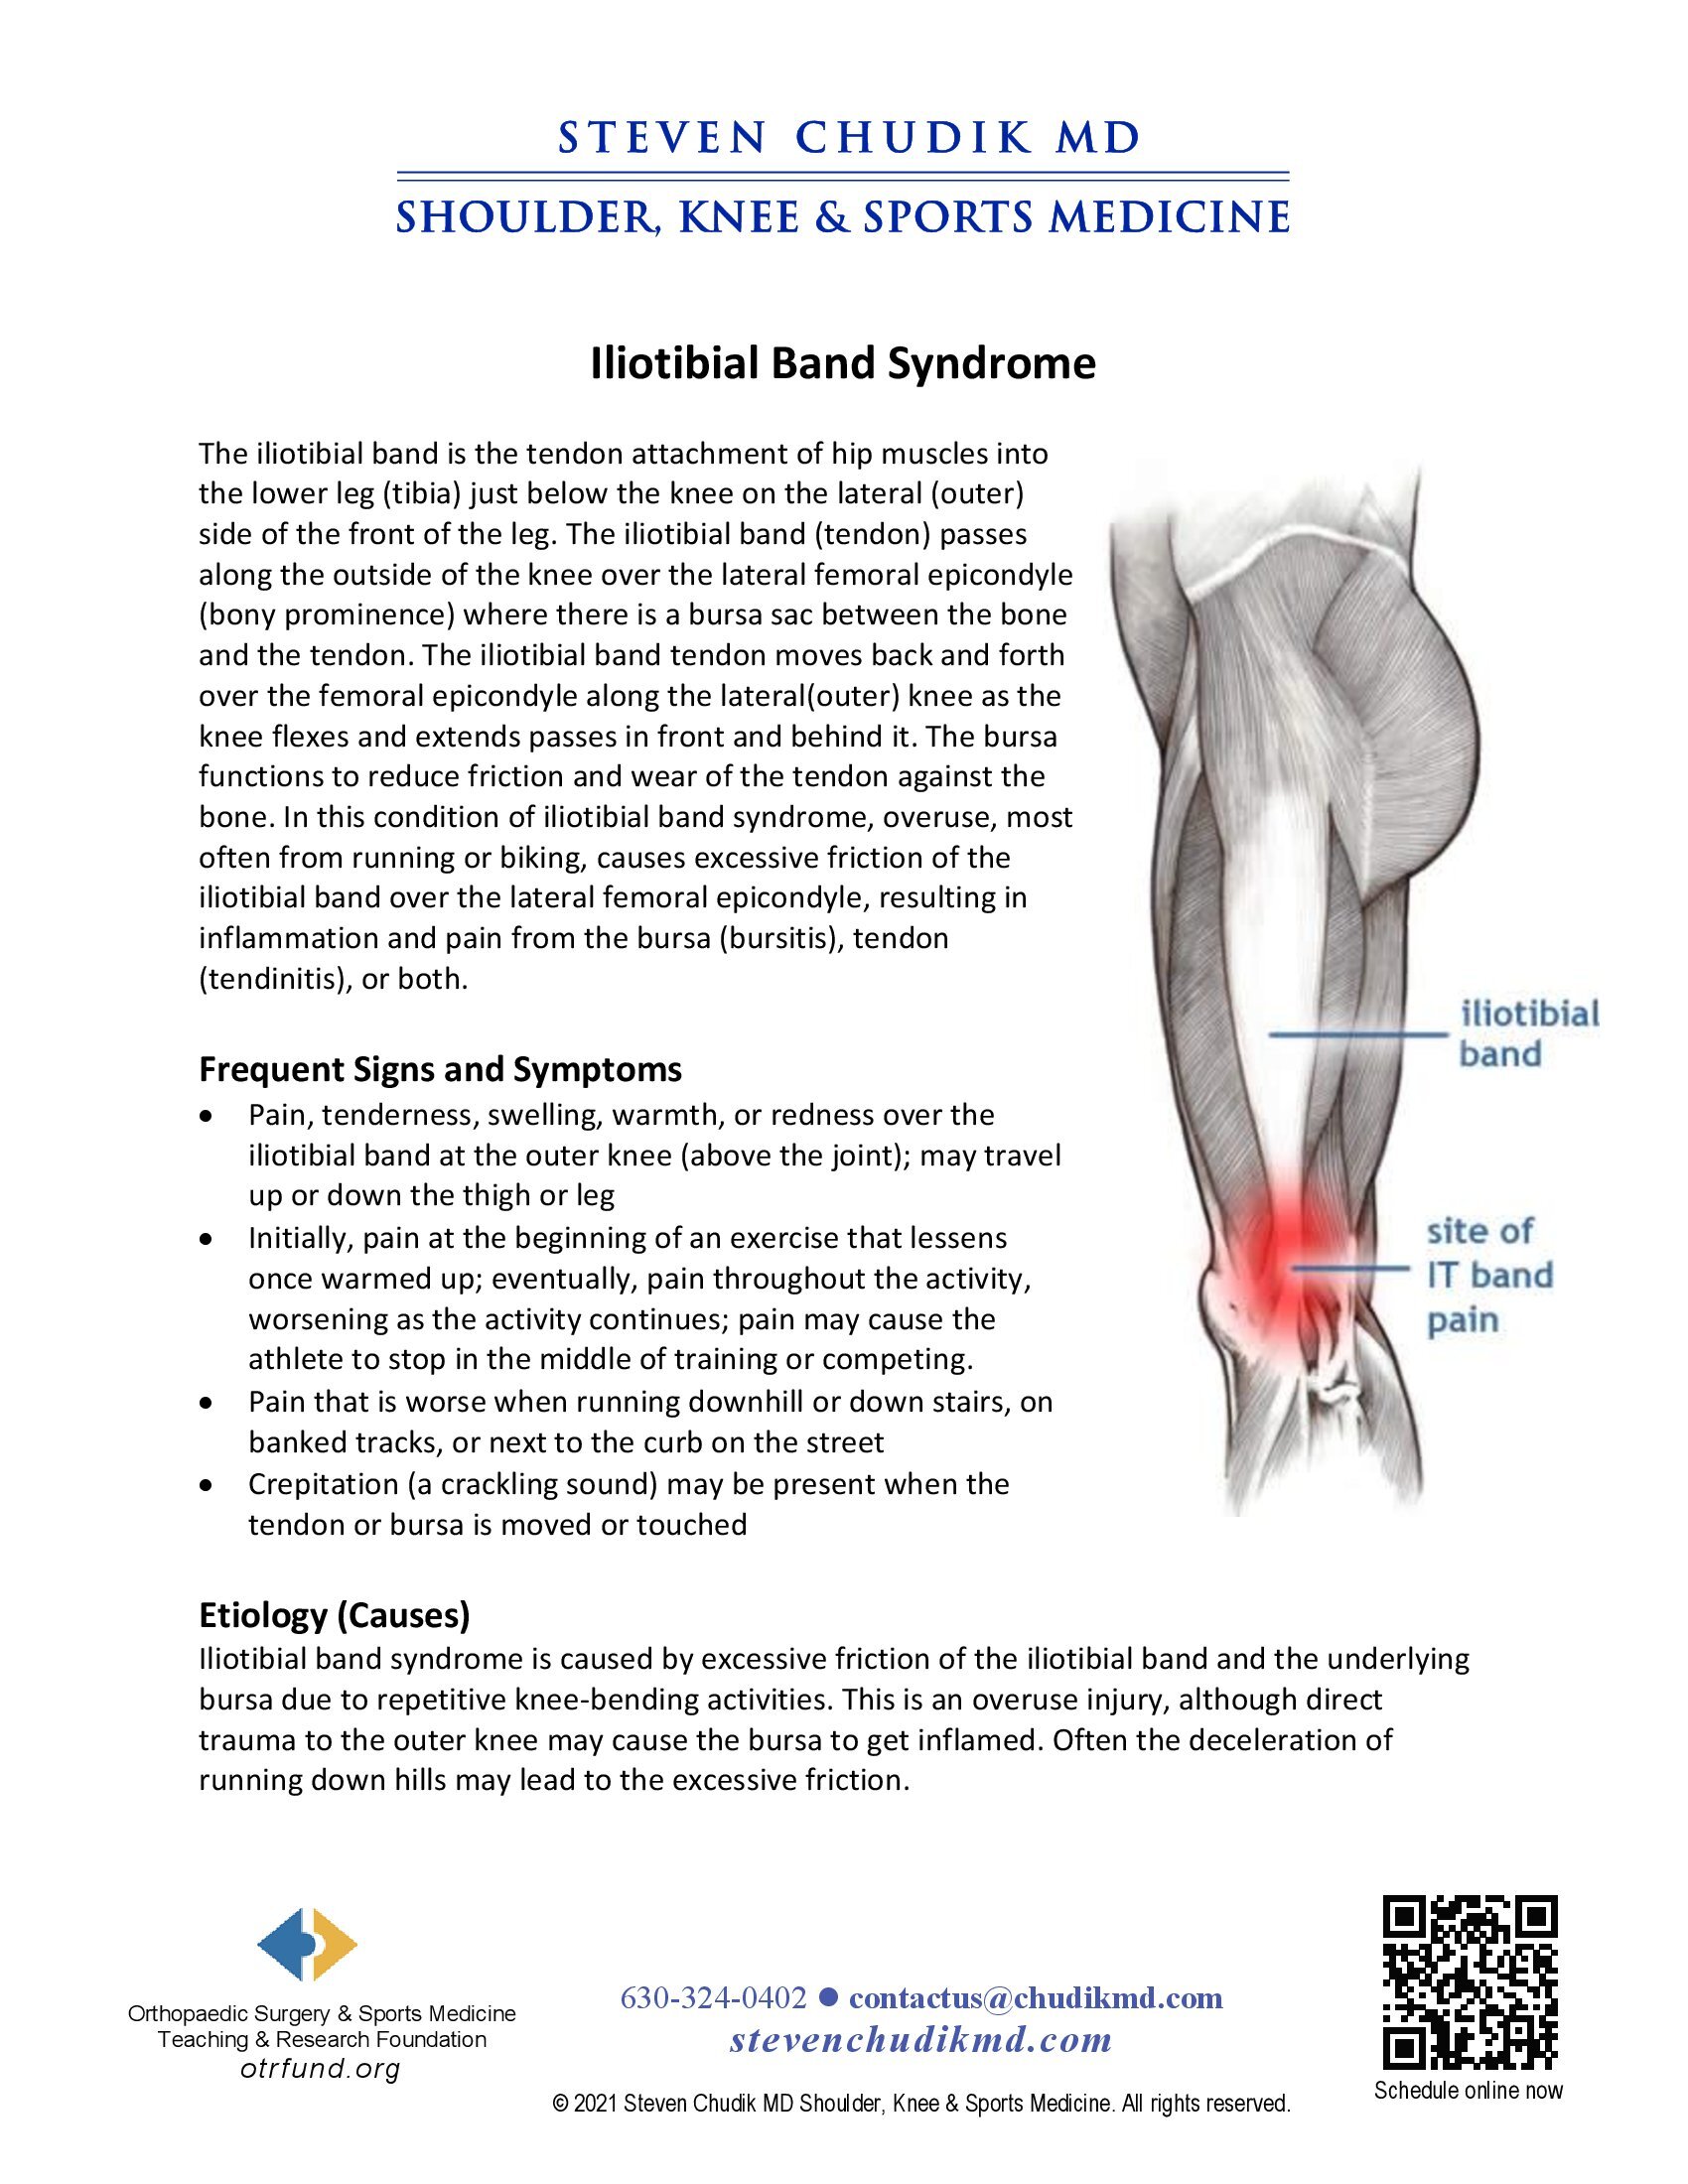 Iliotibial / IT Band Friction Syndrome: A Common Cause of Knee Pain